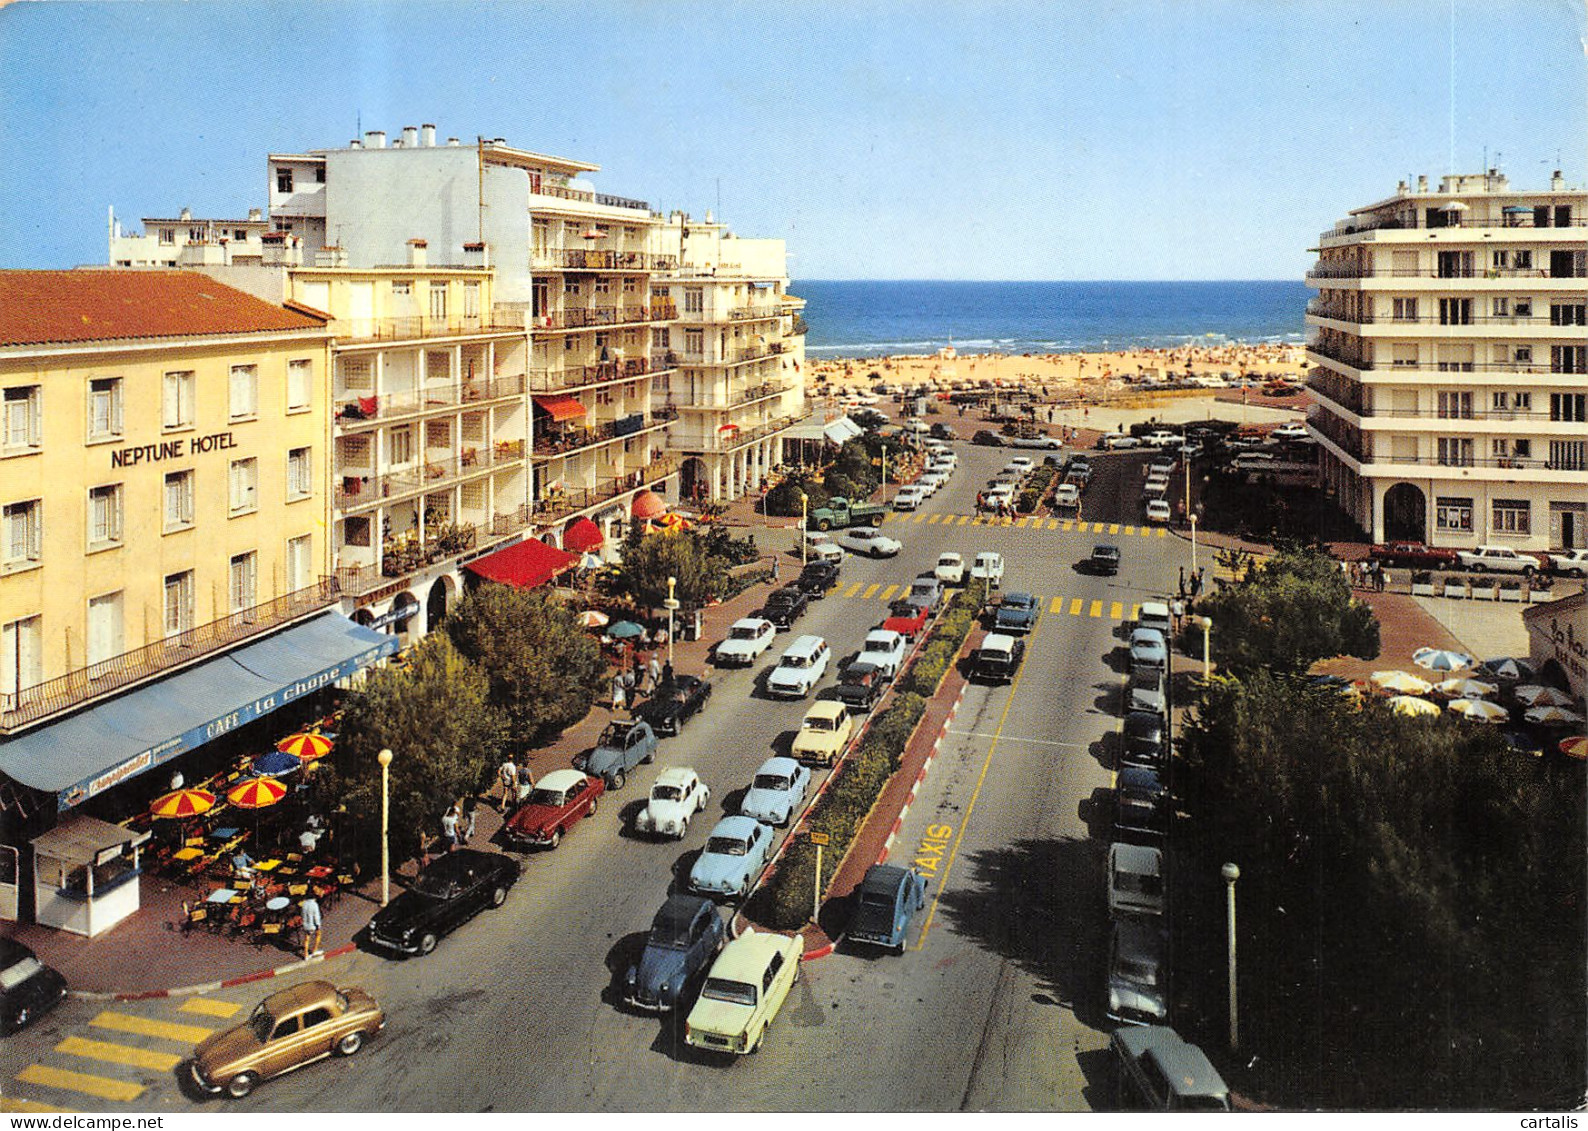 66-CANET PLAGE-N 603-A/0259 - Canet Plage